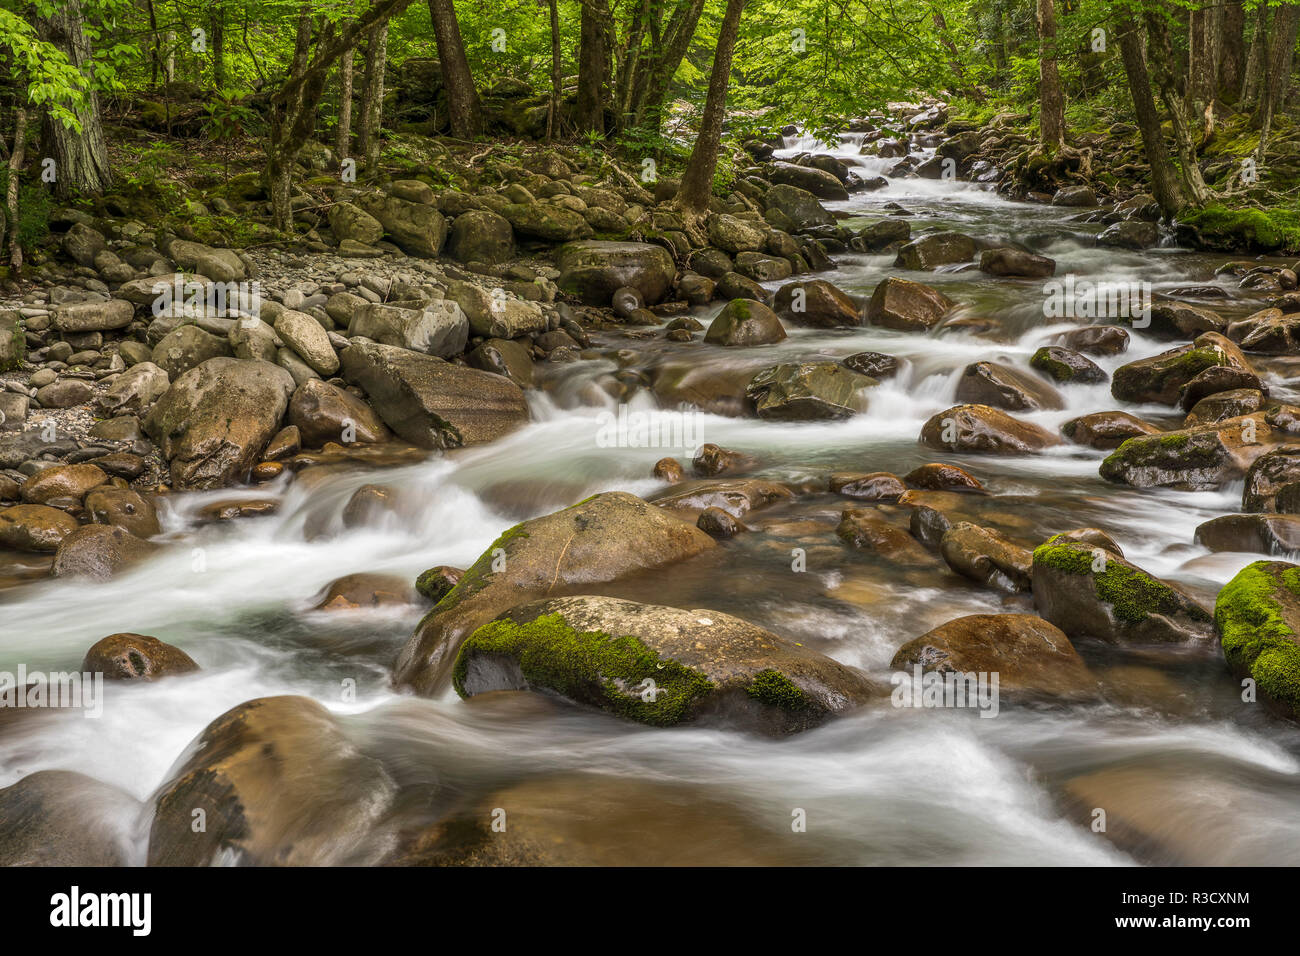 Spring view of Little Pigeon River, Greenbrier, Great Smoky Mountains National Park, Tennessee Stock Photo